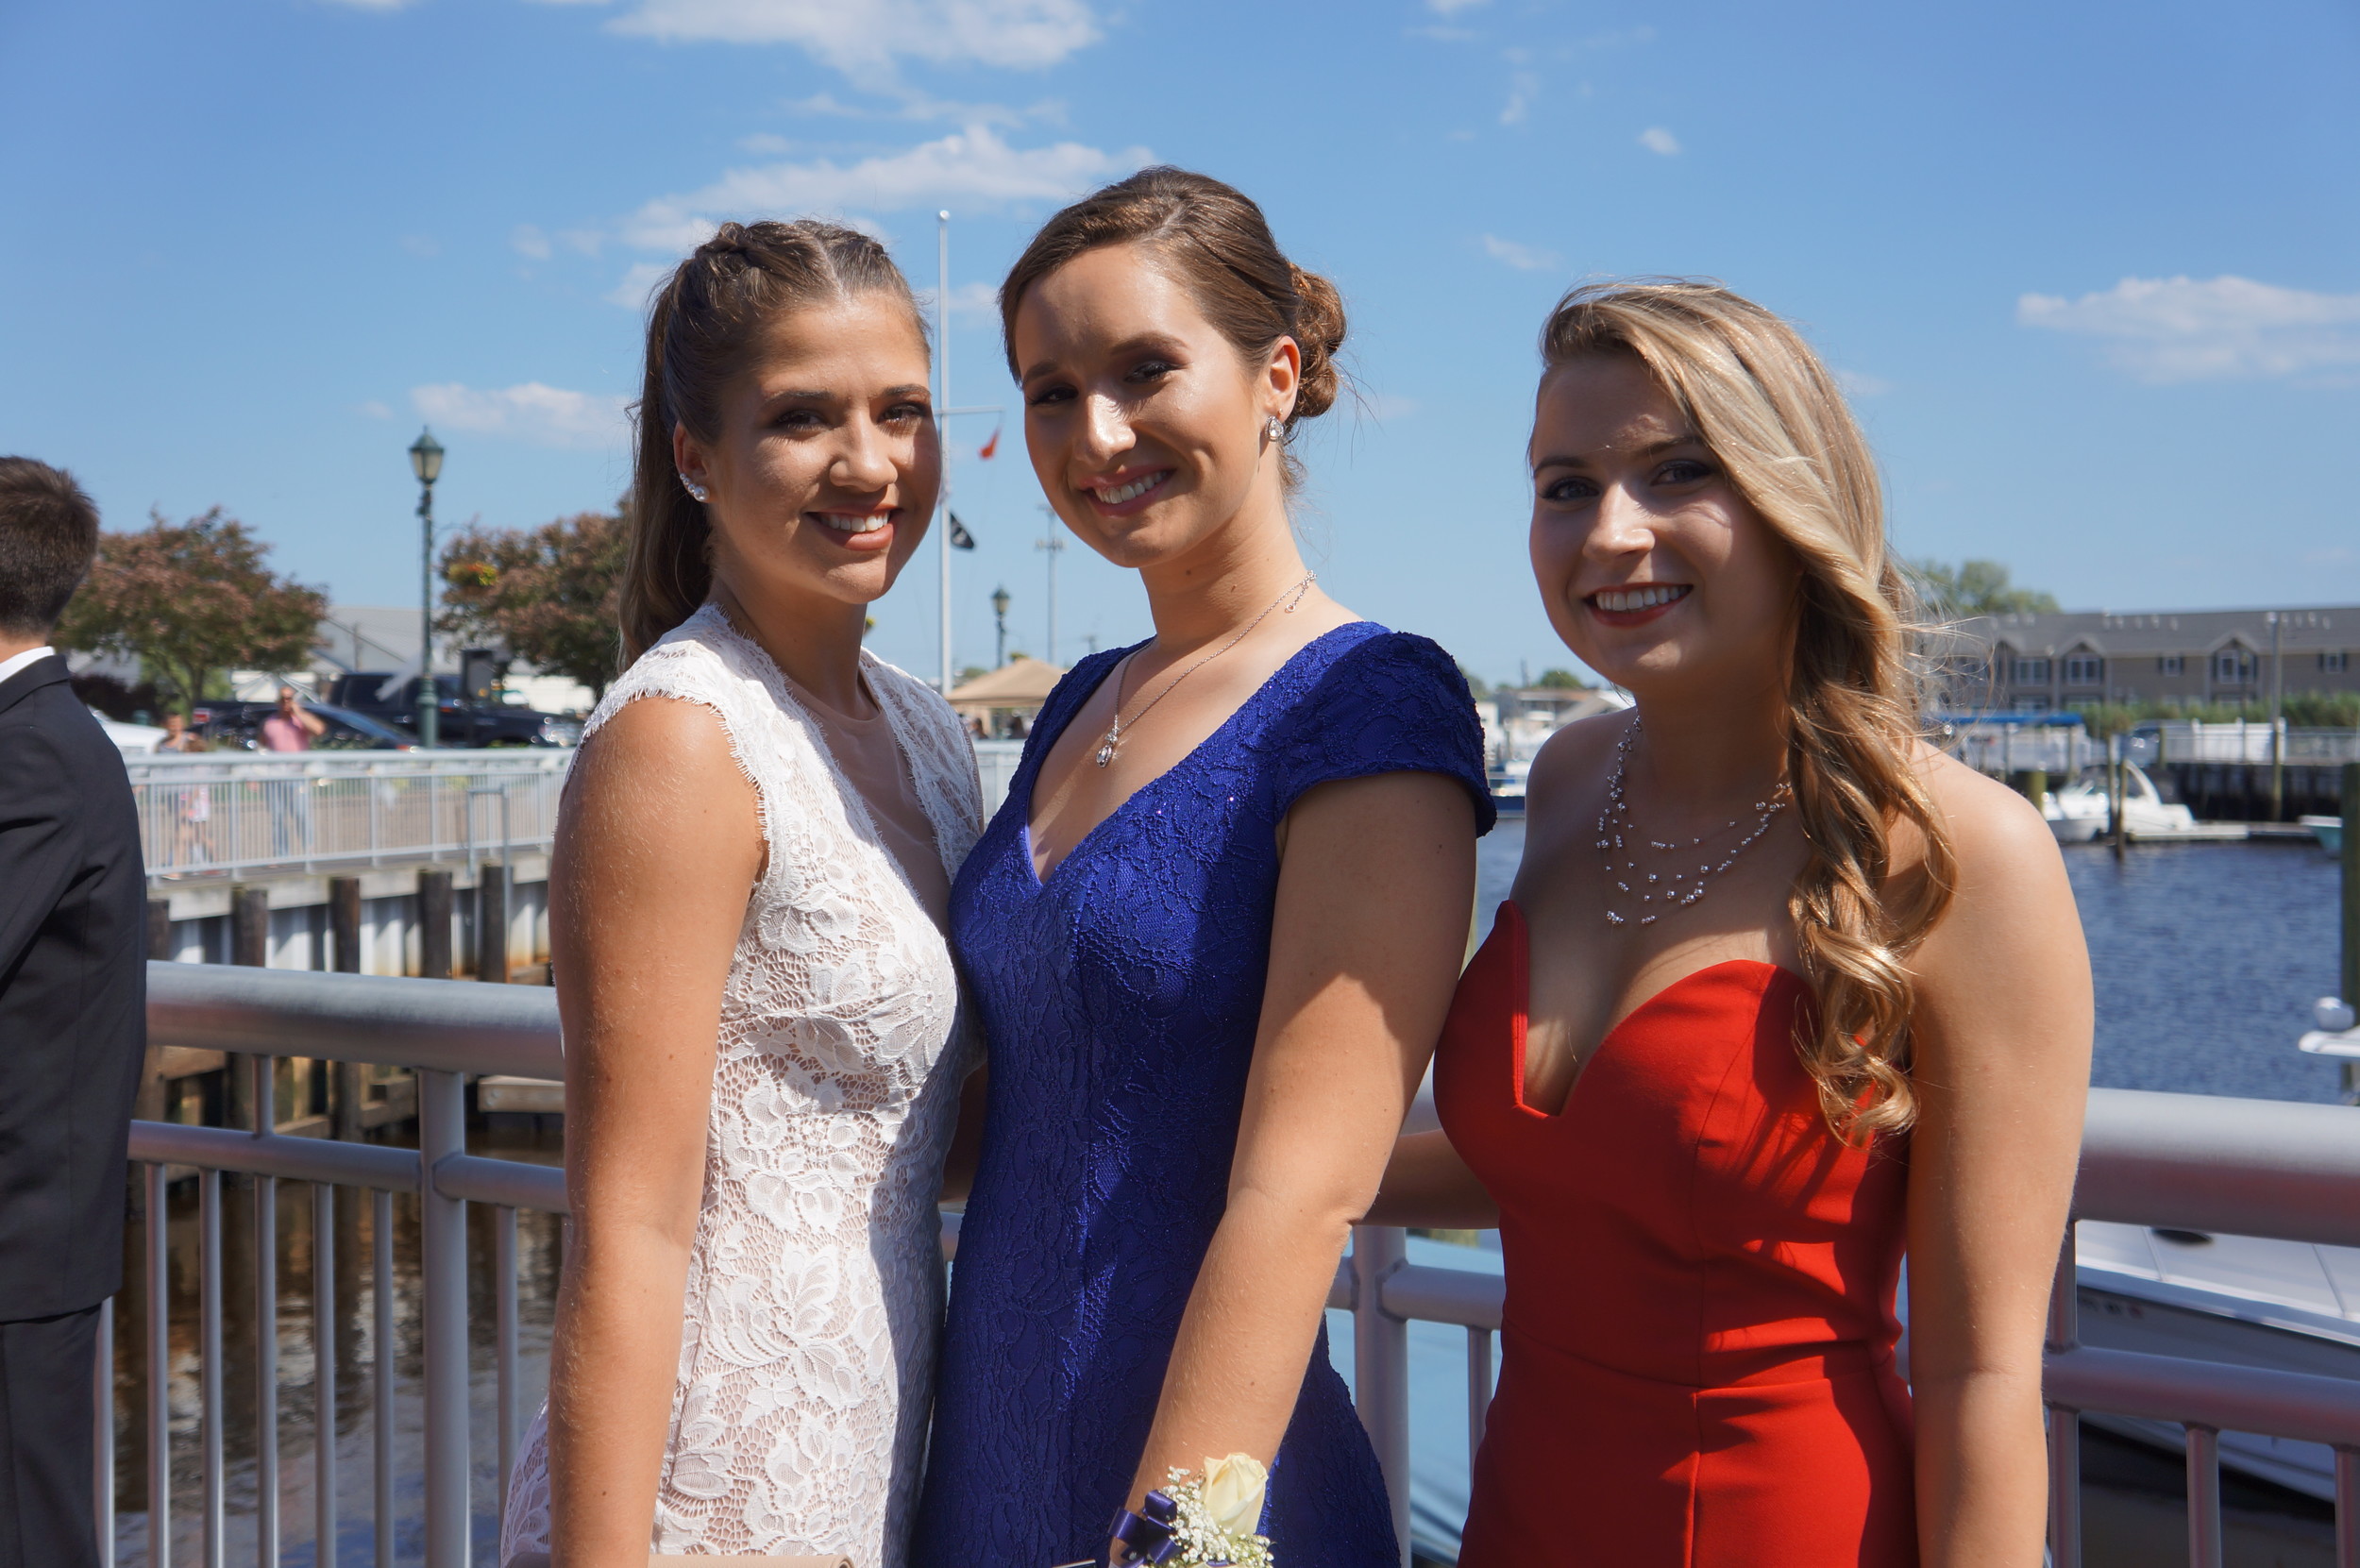 Rachael Putelo, Meagan Ochtera and Nora Louw captured memories before what promised to be an unforgettable night.